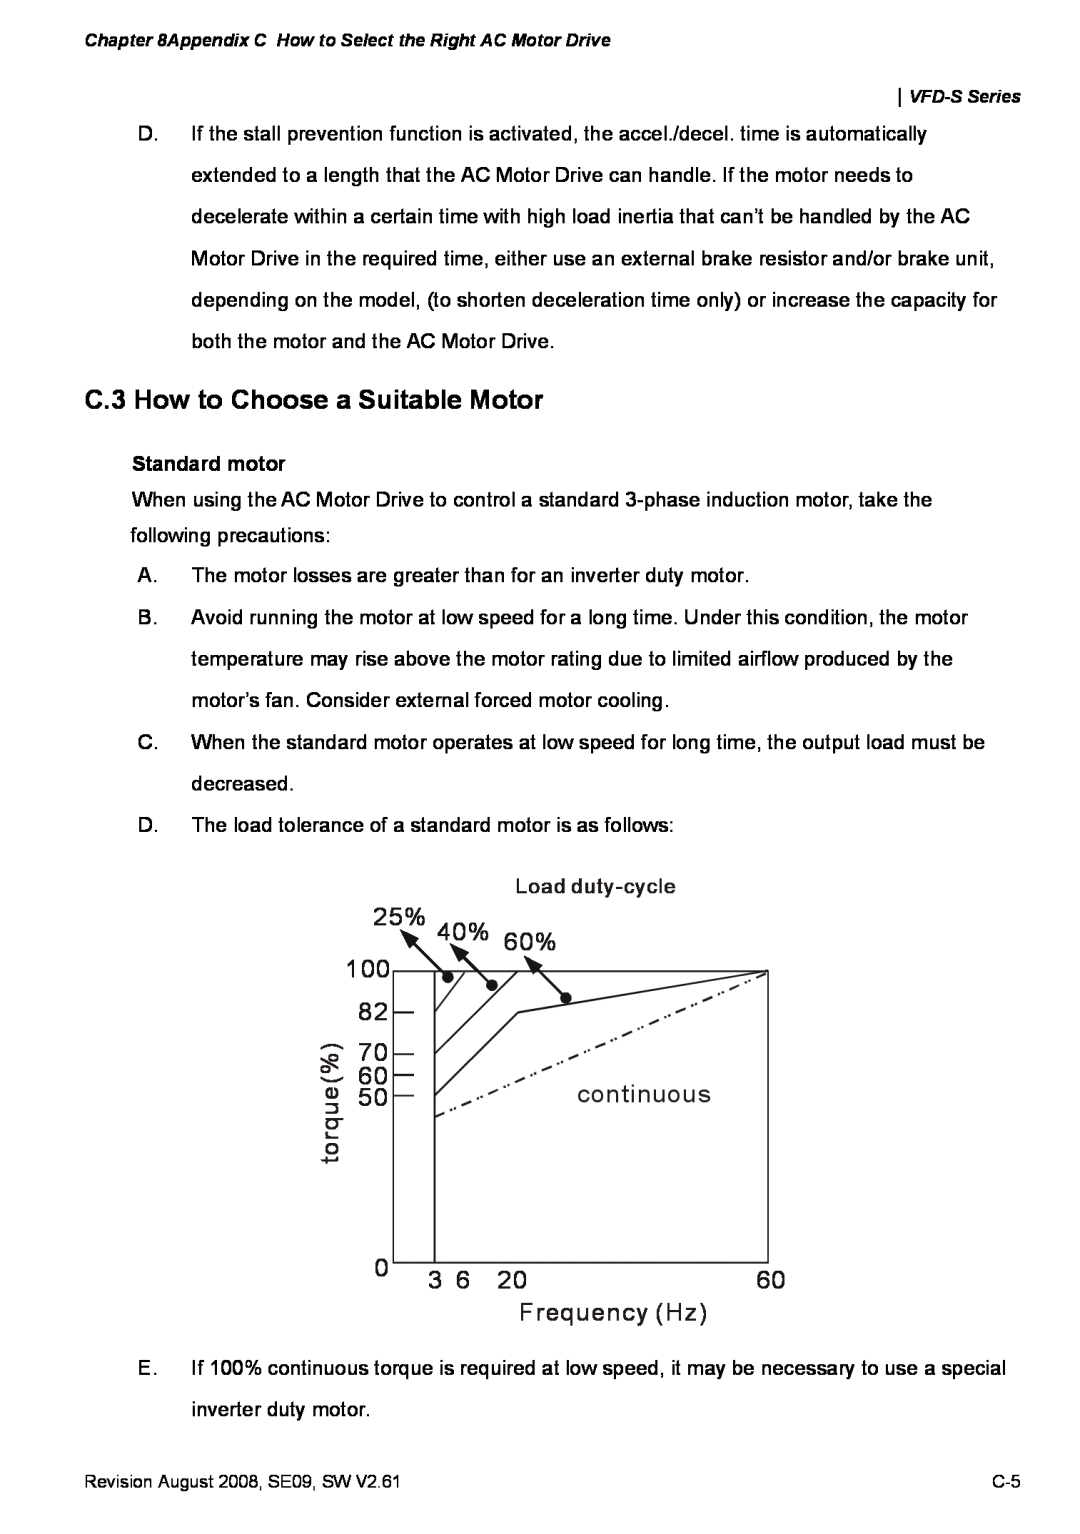 Delta Electronics VFD-S manual C.3 How to Choose a Suitable Motor, torque%, 25% 40% 60% 100, continuous, Frequency Hz 